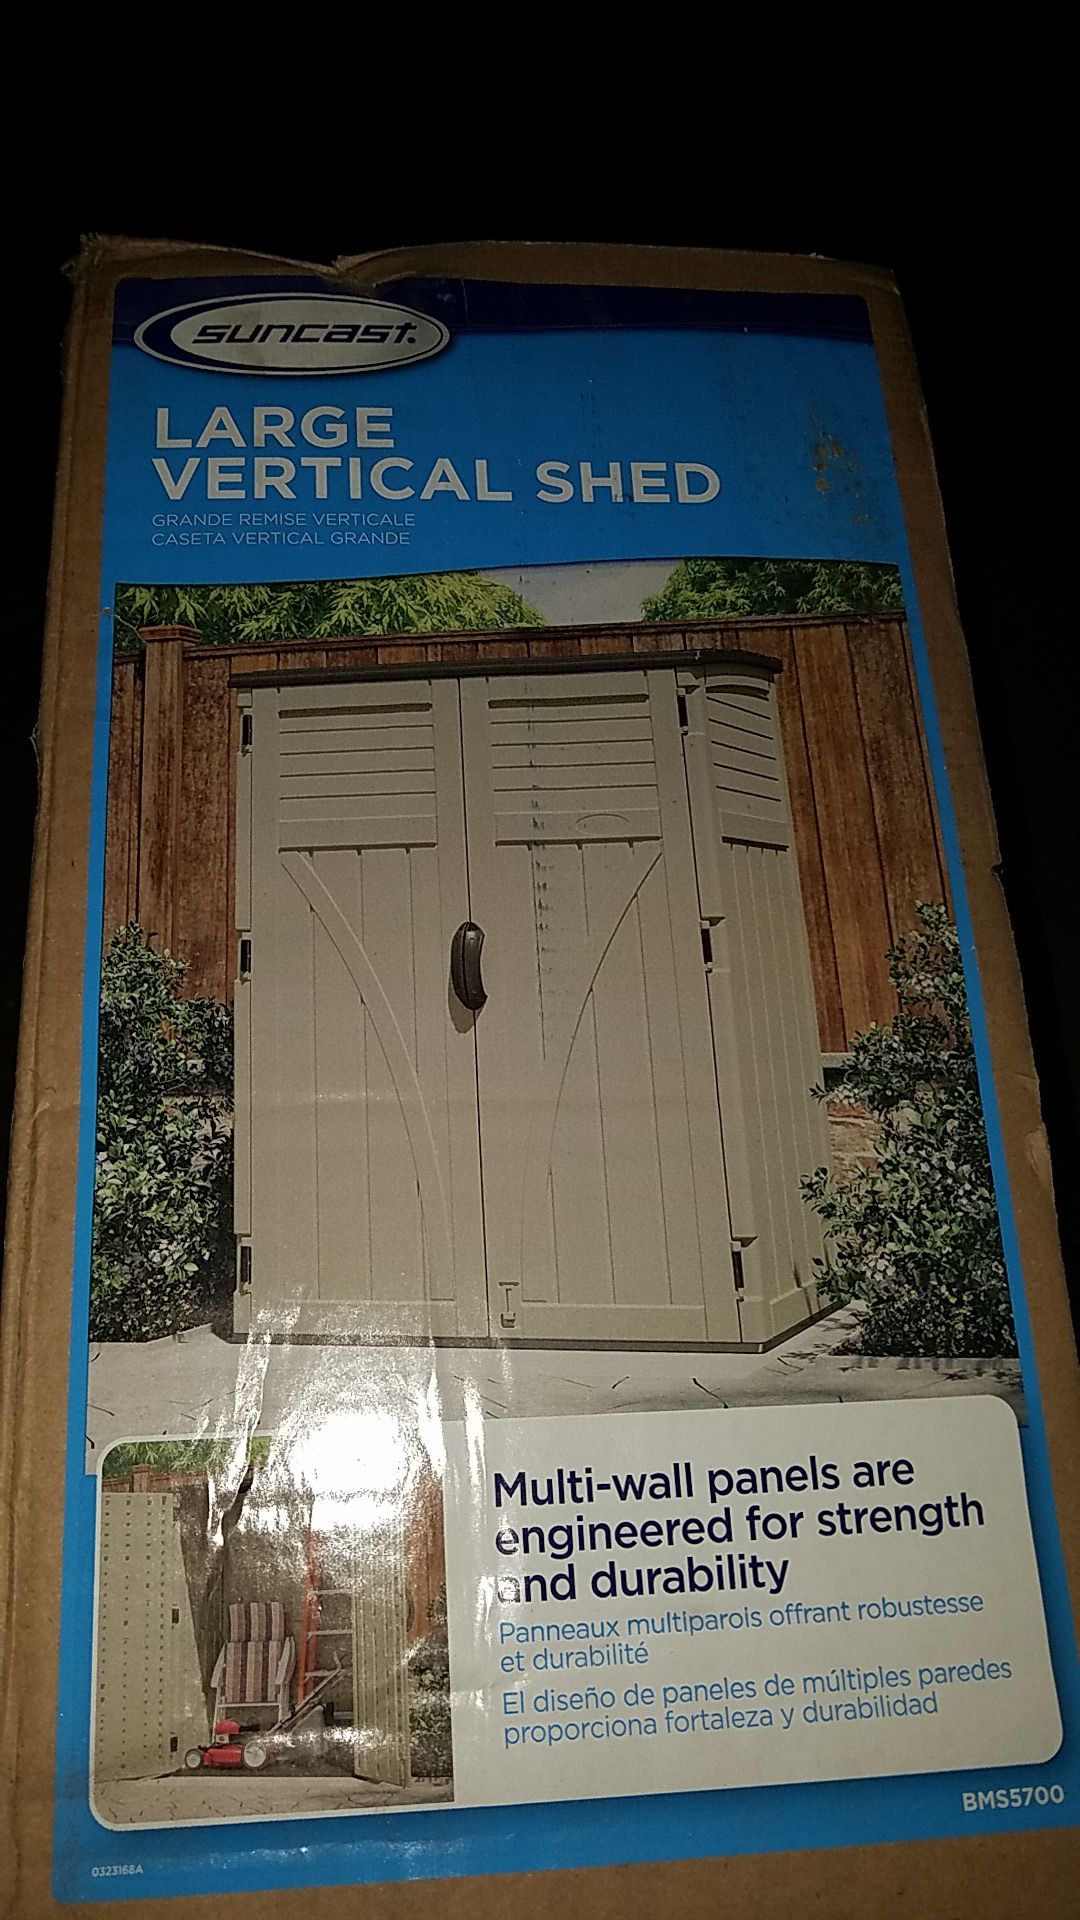 Vertical shed